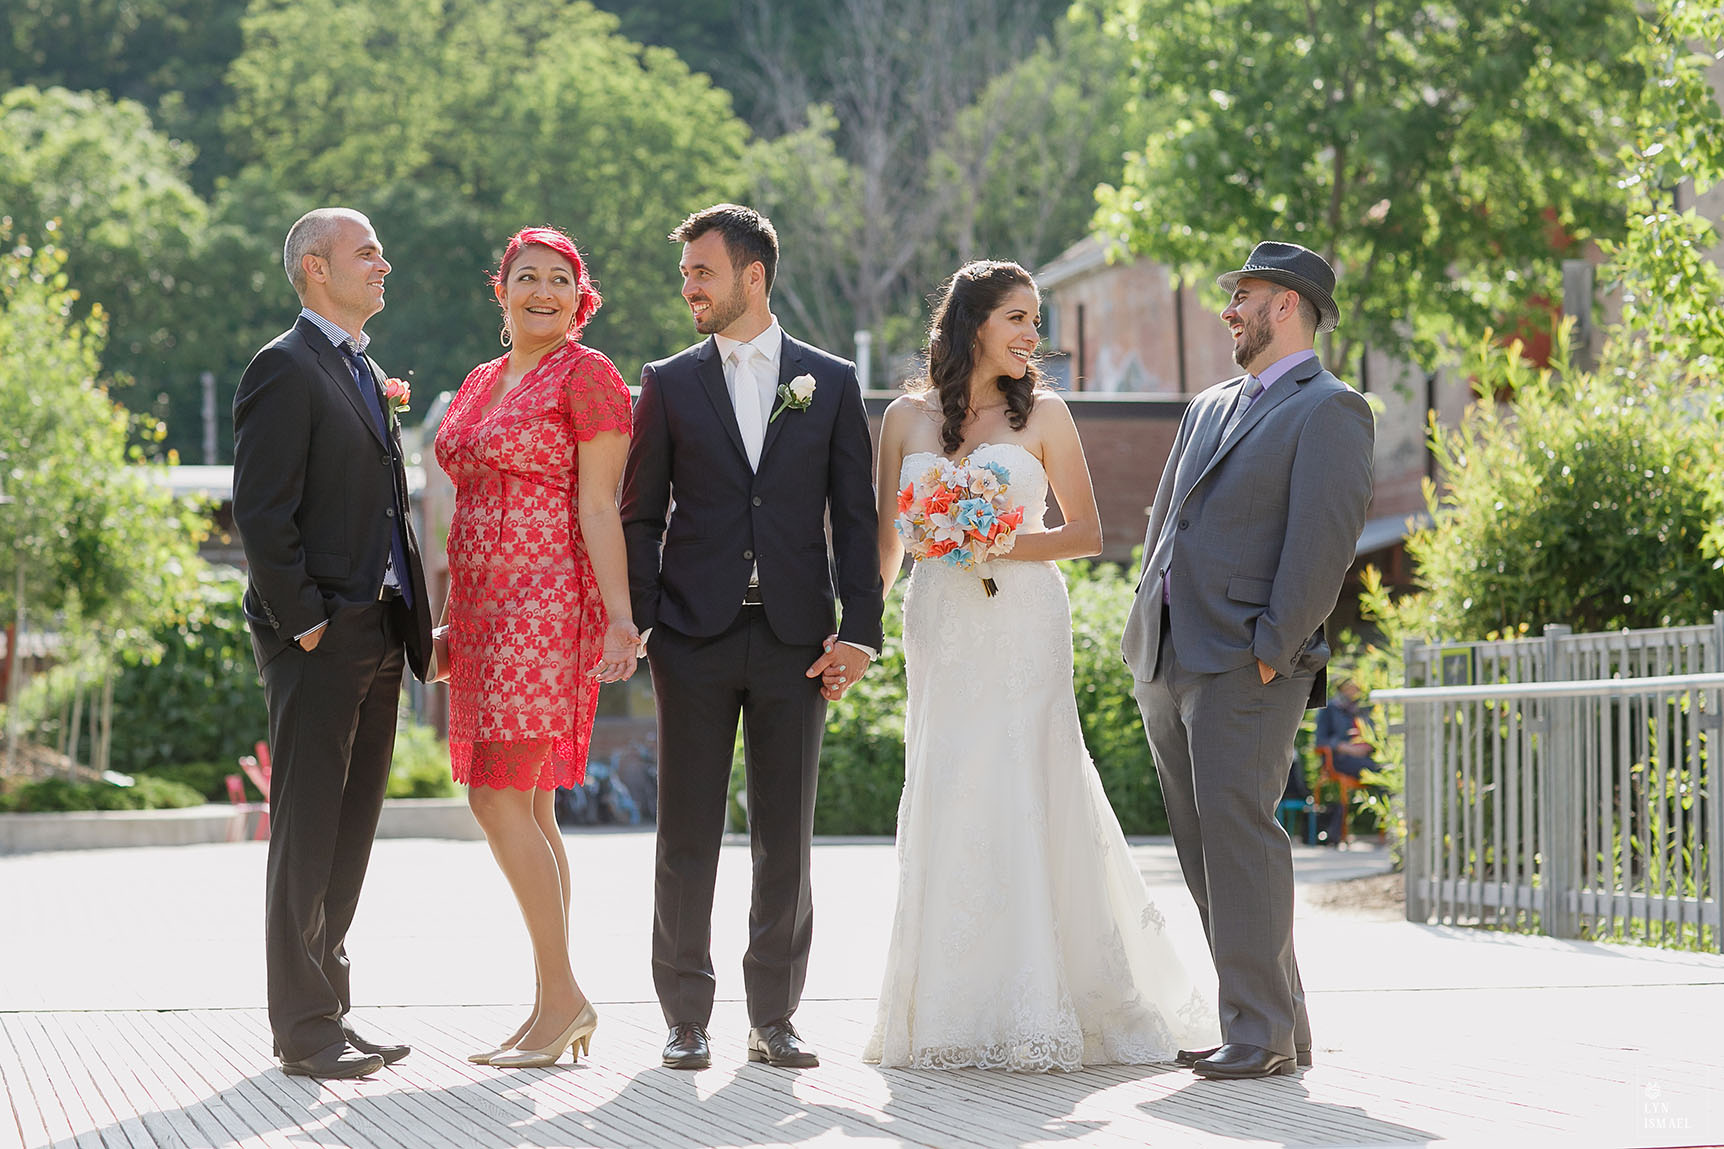 Wedding party at Evergreen Brick Works in Toronto